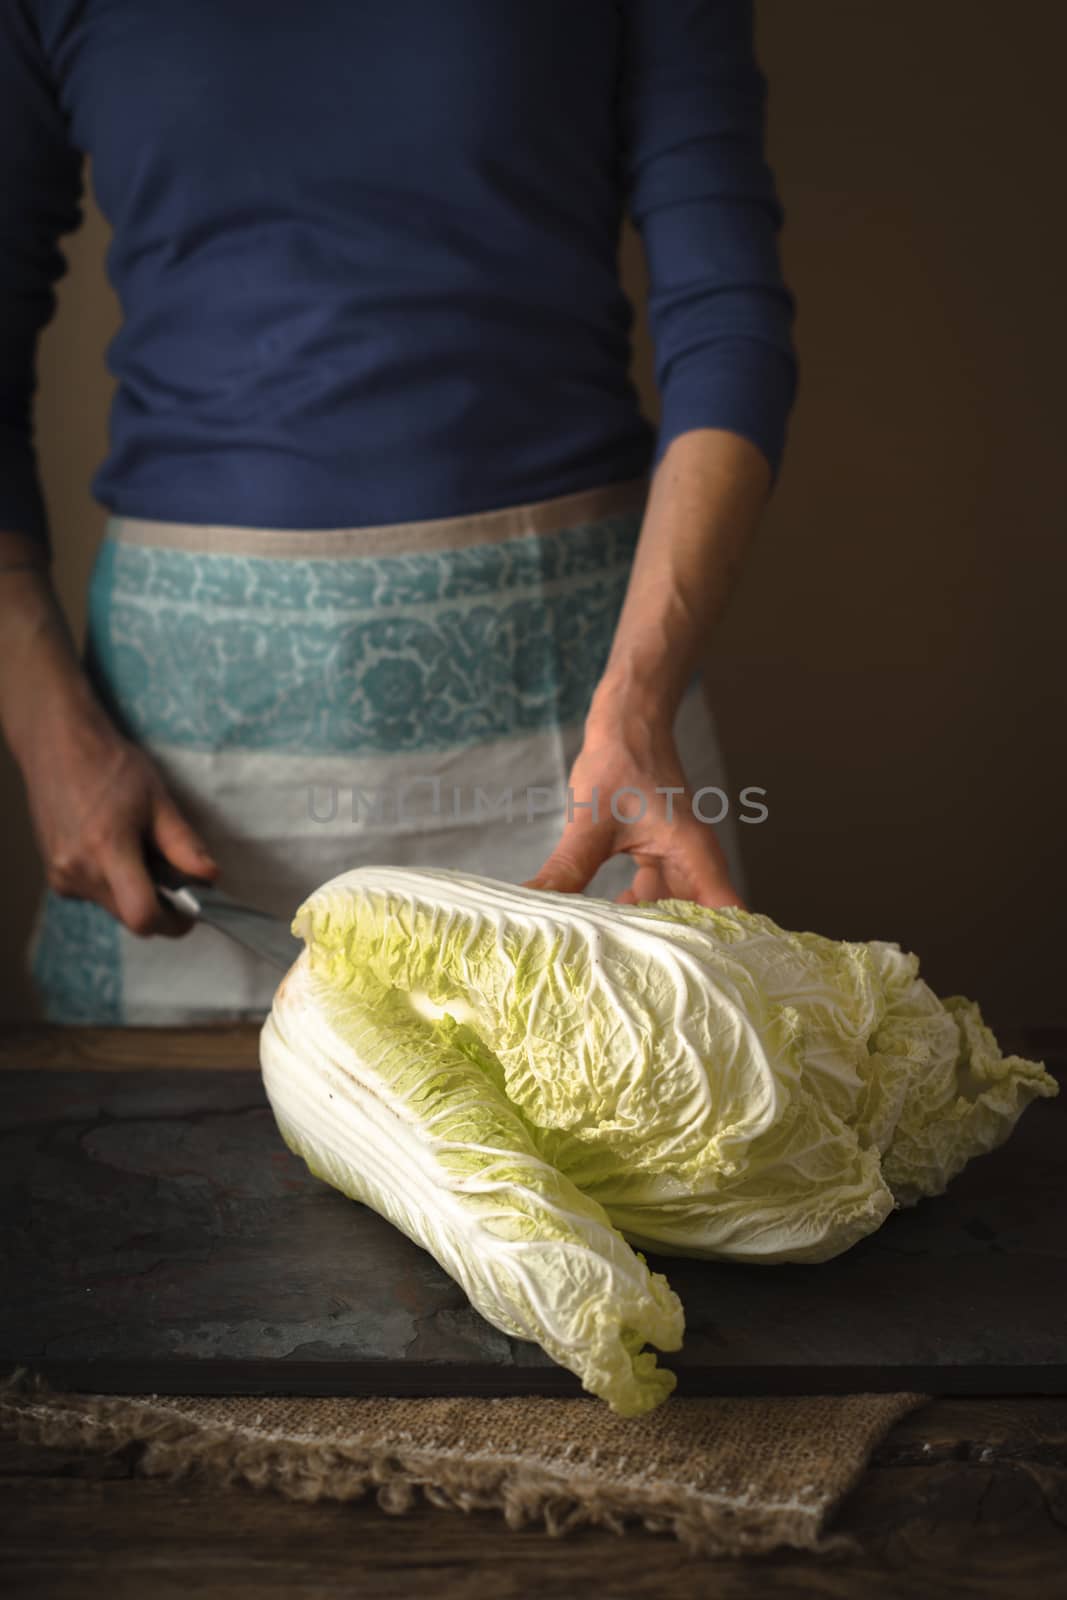 Woman cuts Chinese cabbage on a gray slate by Deniskarpenkov